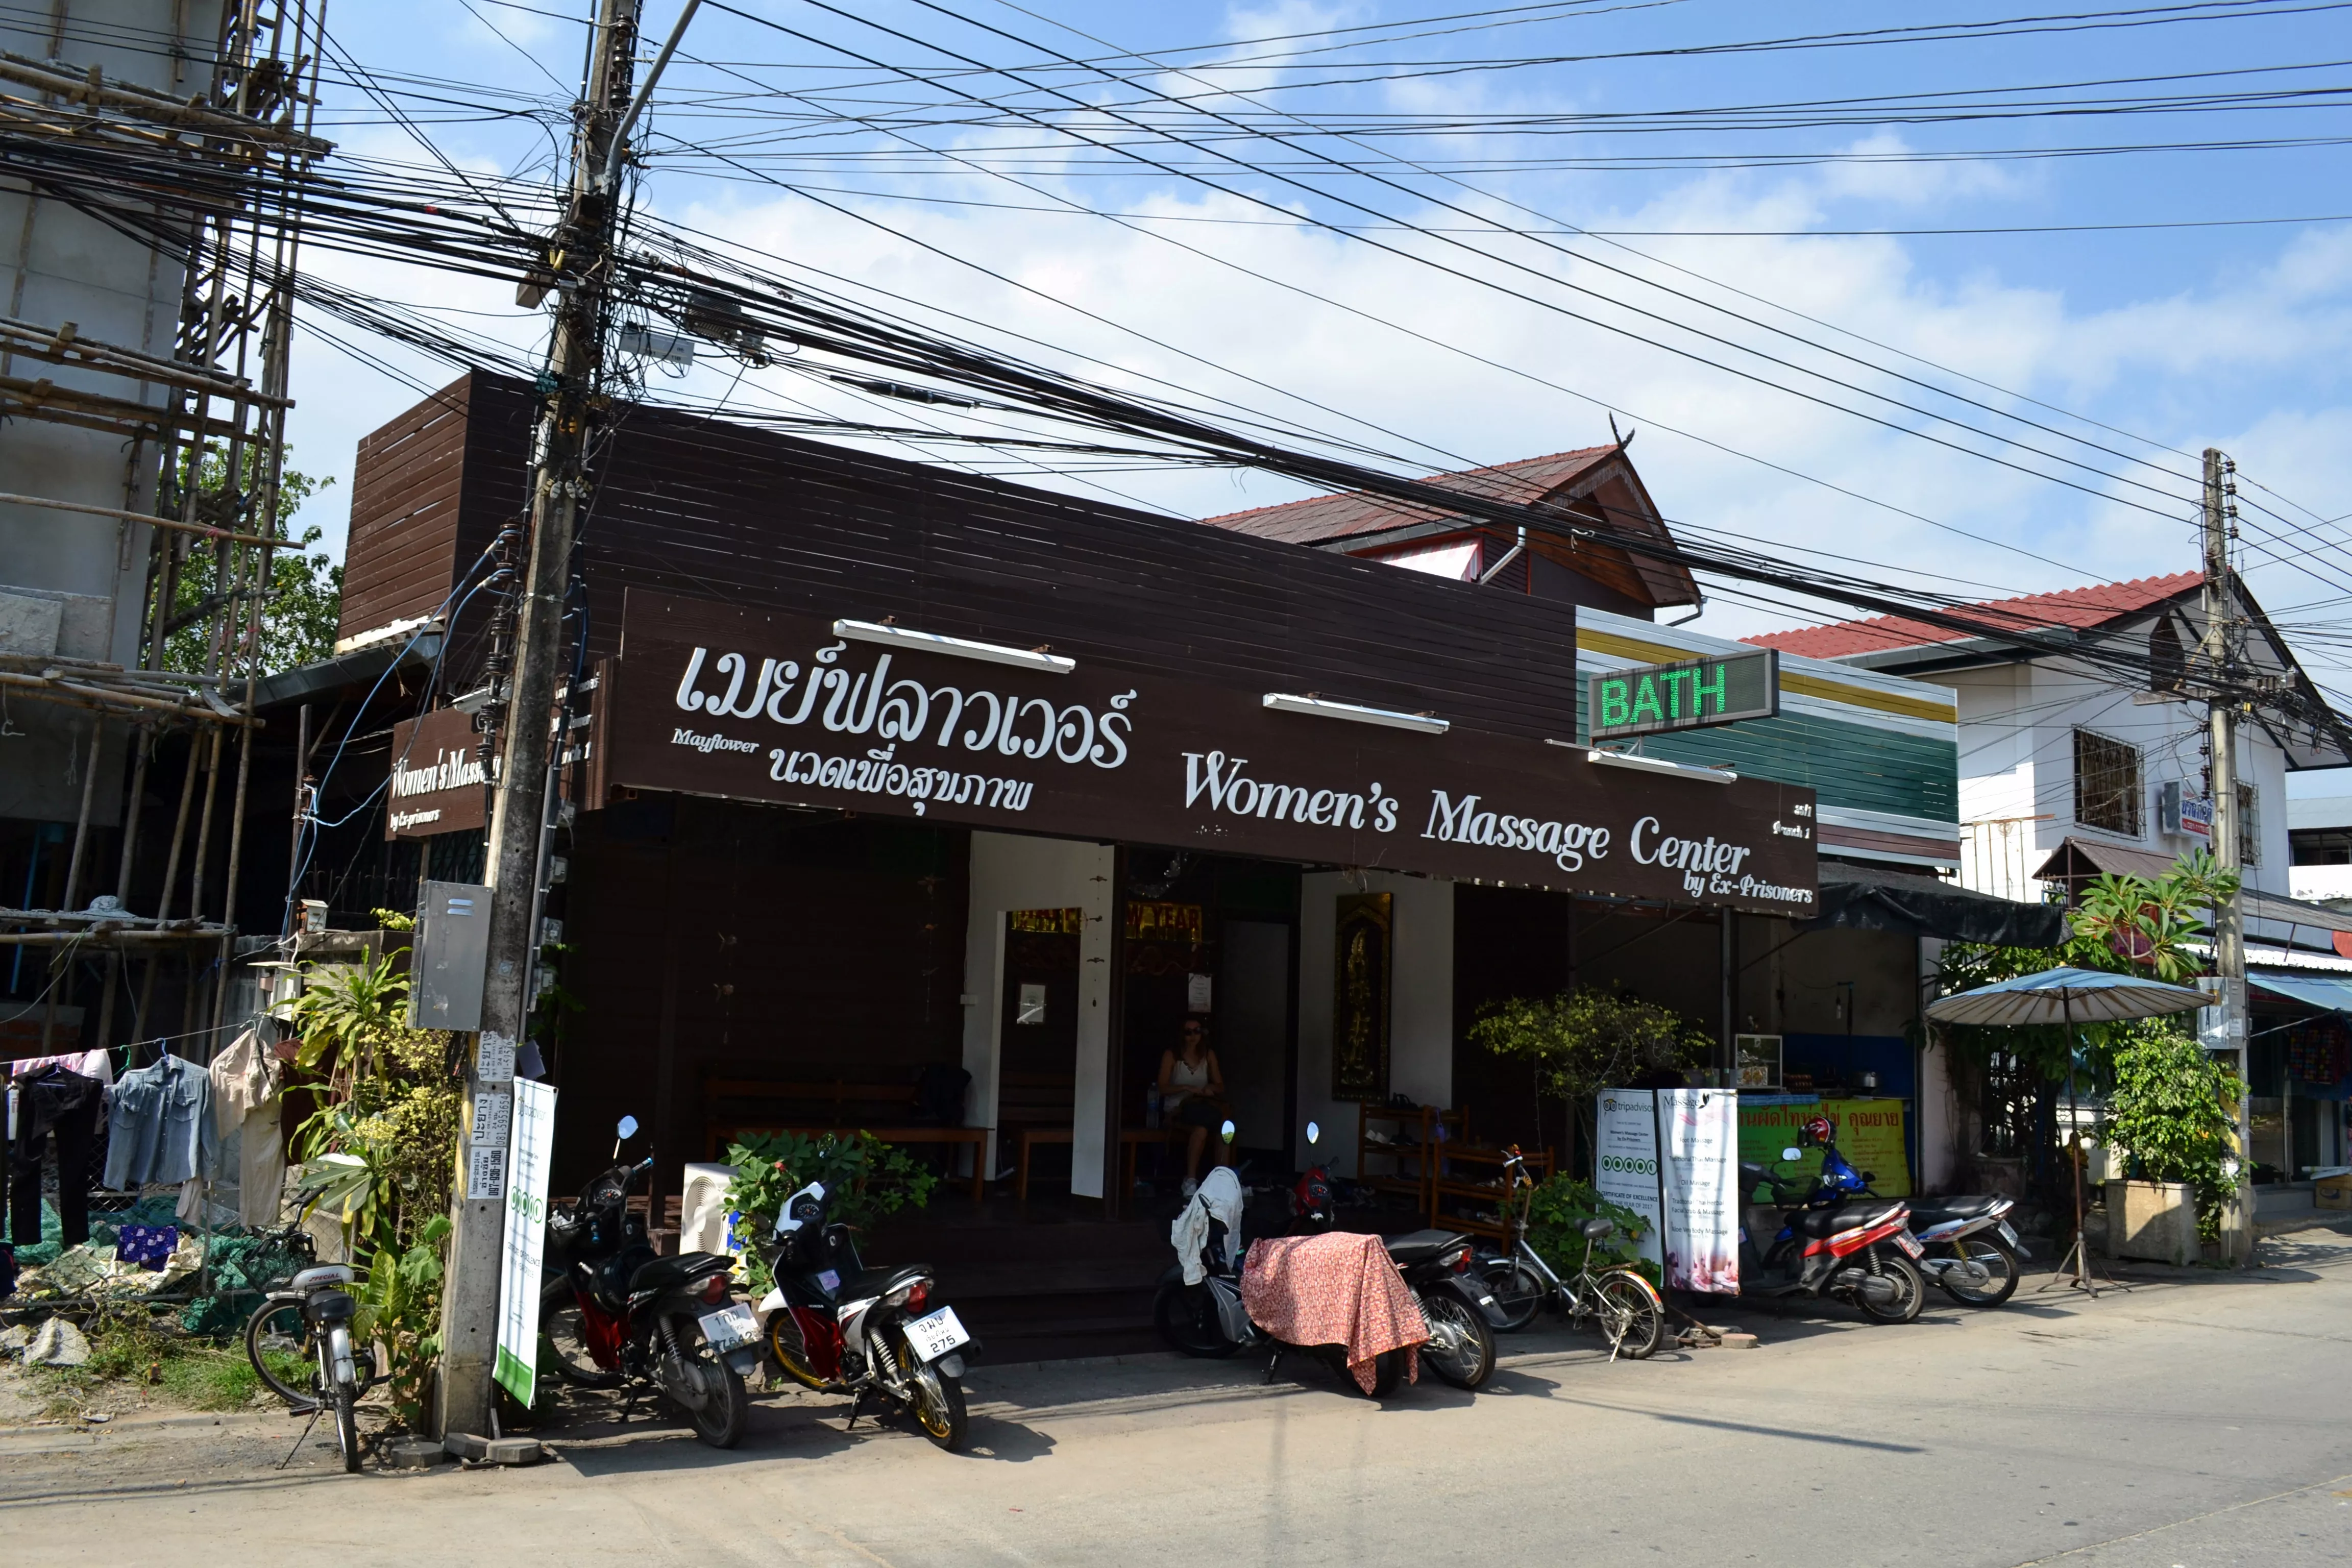 Women's Massage Center by Ex-Prisoners in Thailand, Central Asia | Massages - Rated 4.2